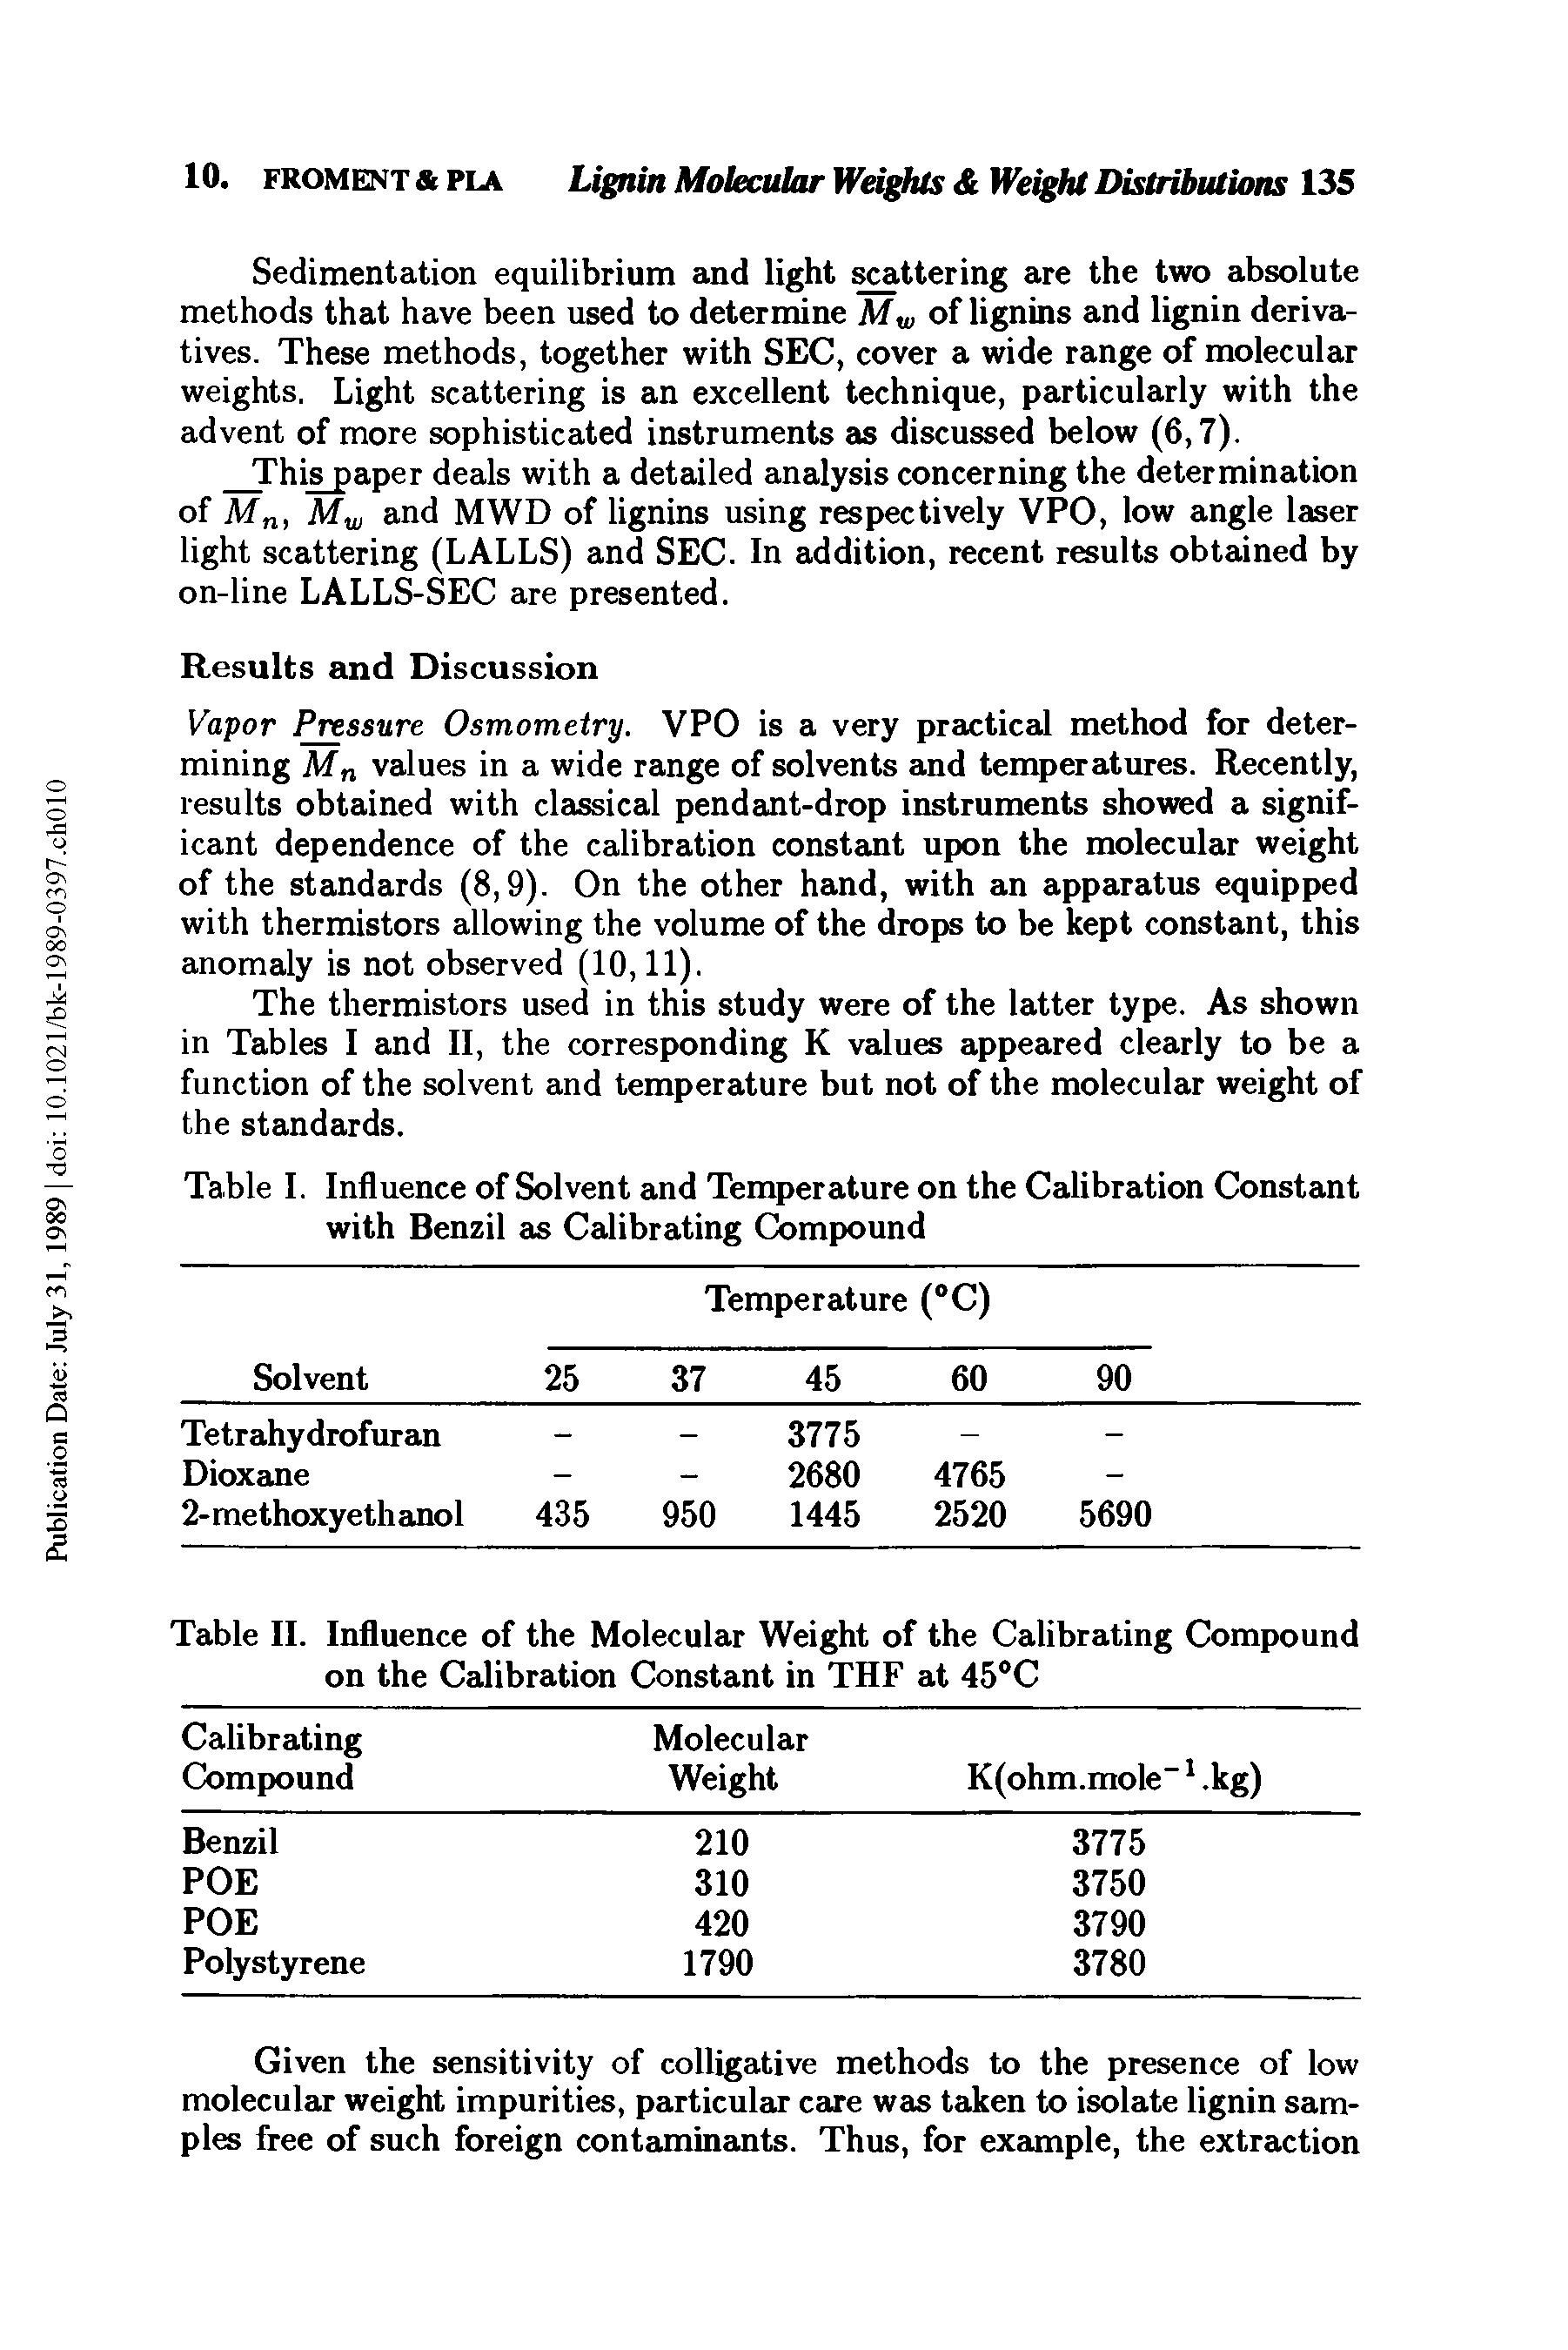 Table I. Influence of Solvent and Temperature on the Calibration Constant with Benzil as Calibrating Compound...